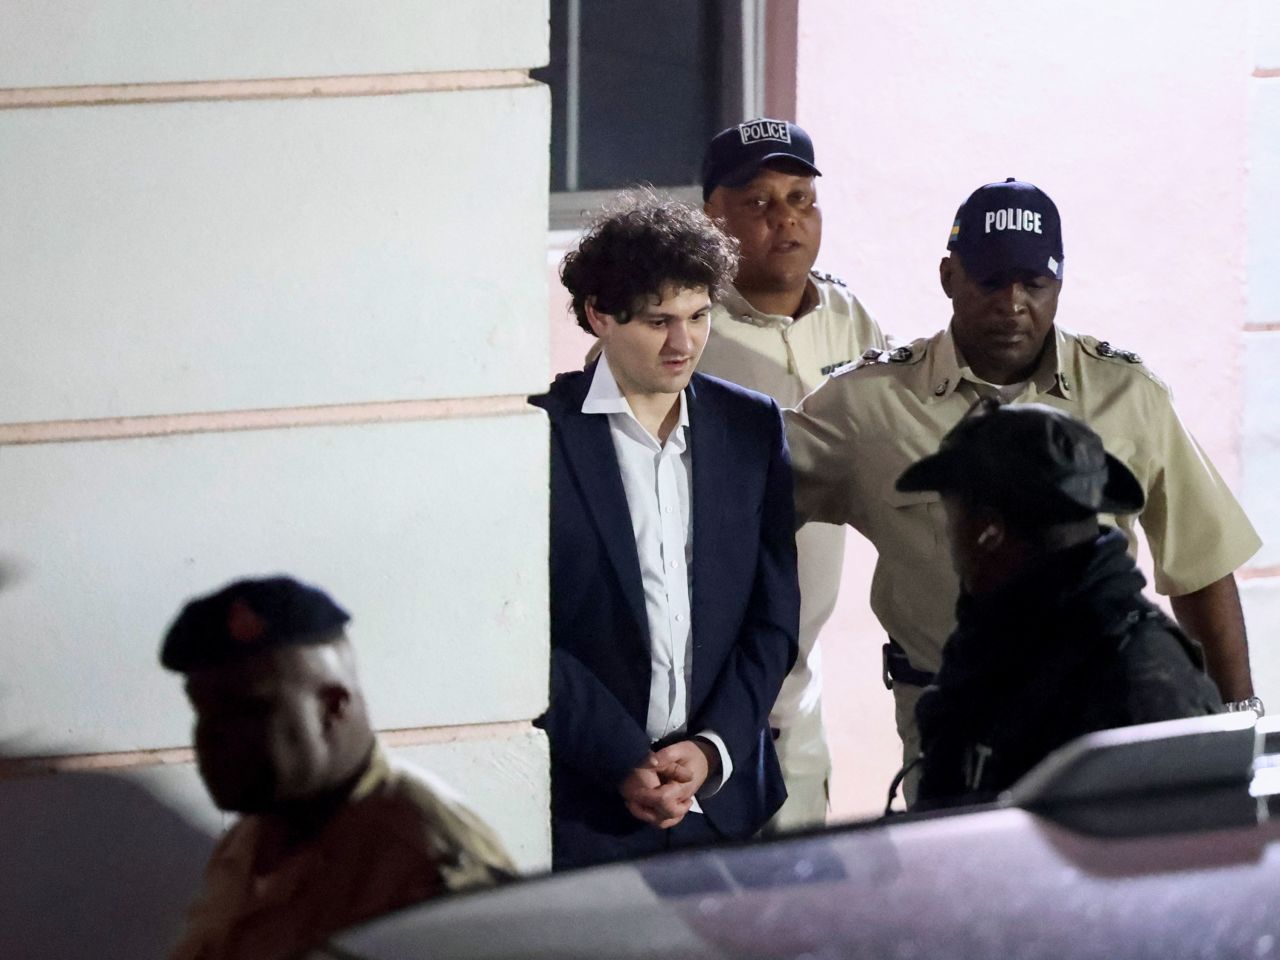 Sam Bankman-Fried, the founder of failed crypto exchange FTX, is escorted out of the Magistrate Court building in Nassau, Bahamas, on Tuesday, December 13. Bankman-Fried is a crypto celebrity who became a pariah overnight as his company suffered a liquidity crisis and filed for bankruptcy in November, leaving at least a million depositors unable to access their funds. US prosecutors <a href="https://www.cnn.com/2022/12/12/business/sam-bankman-fried-arrested/index.html" target="_blank">filed criminal charges against him</a>. After FTX filed for bankruptcy, Bankman-Fried has sought to cast himself as a somewhat hapless chief executive who got out over his skis, <a href="https://www.cnn.com/2022/12/01/business/sbf-interview-gma/index.html" target="_blank">denying accusations that he defrauded FTX's customers</a>.